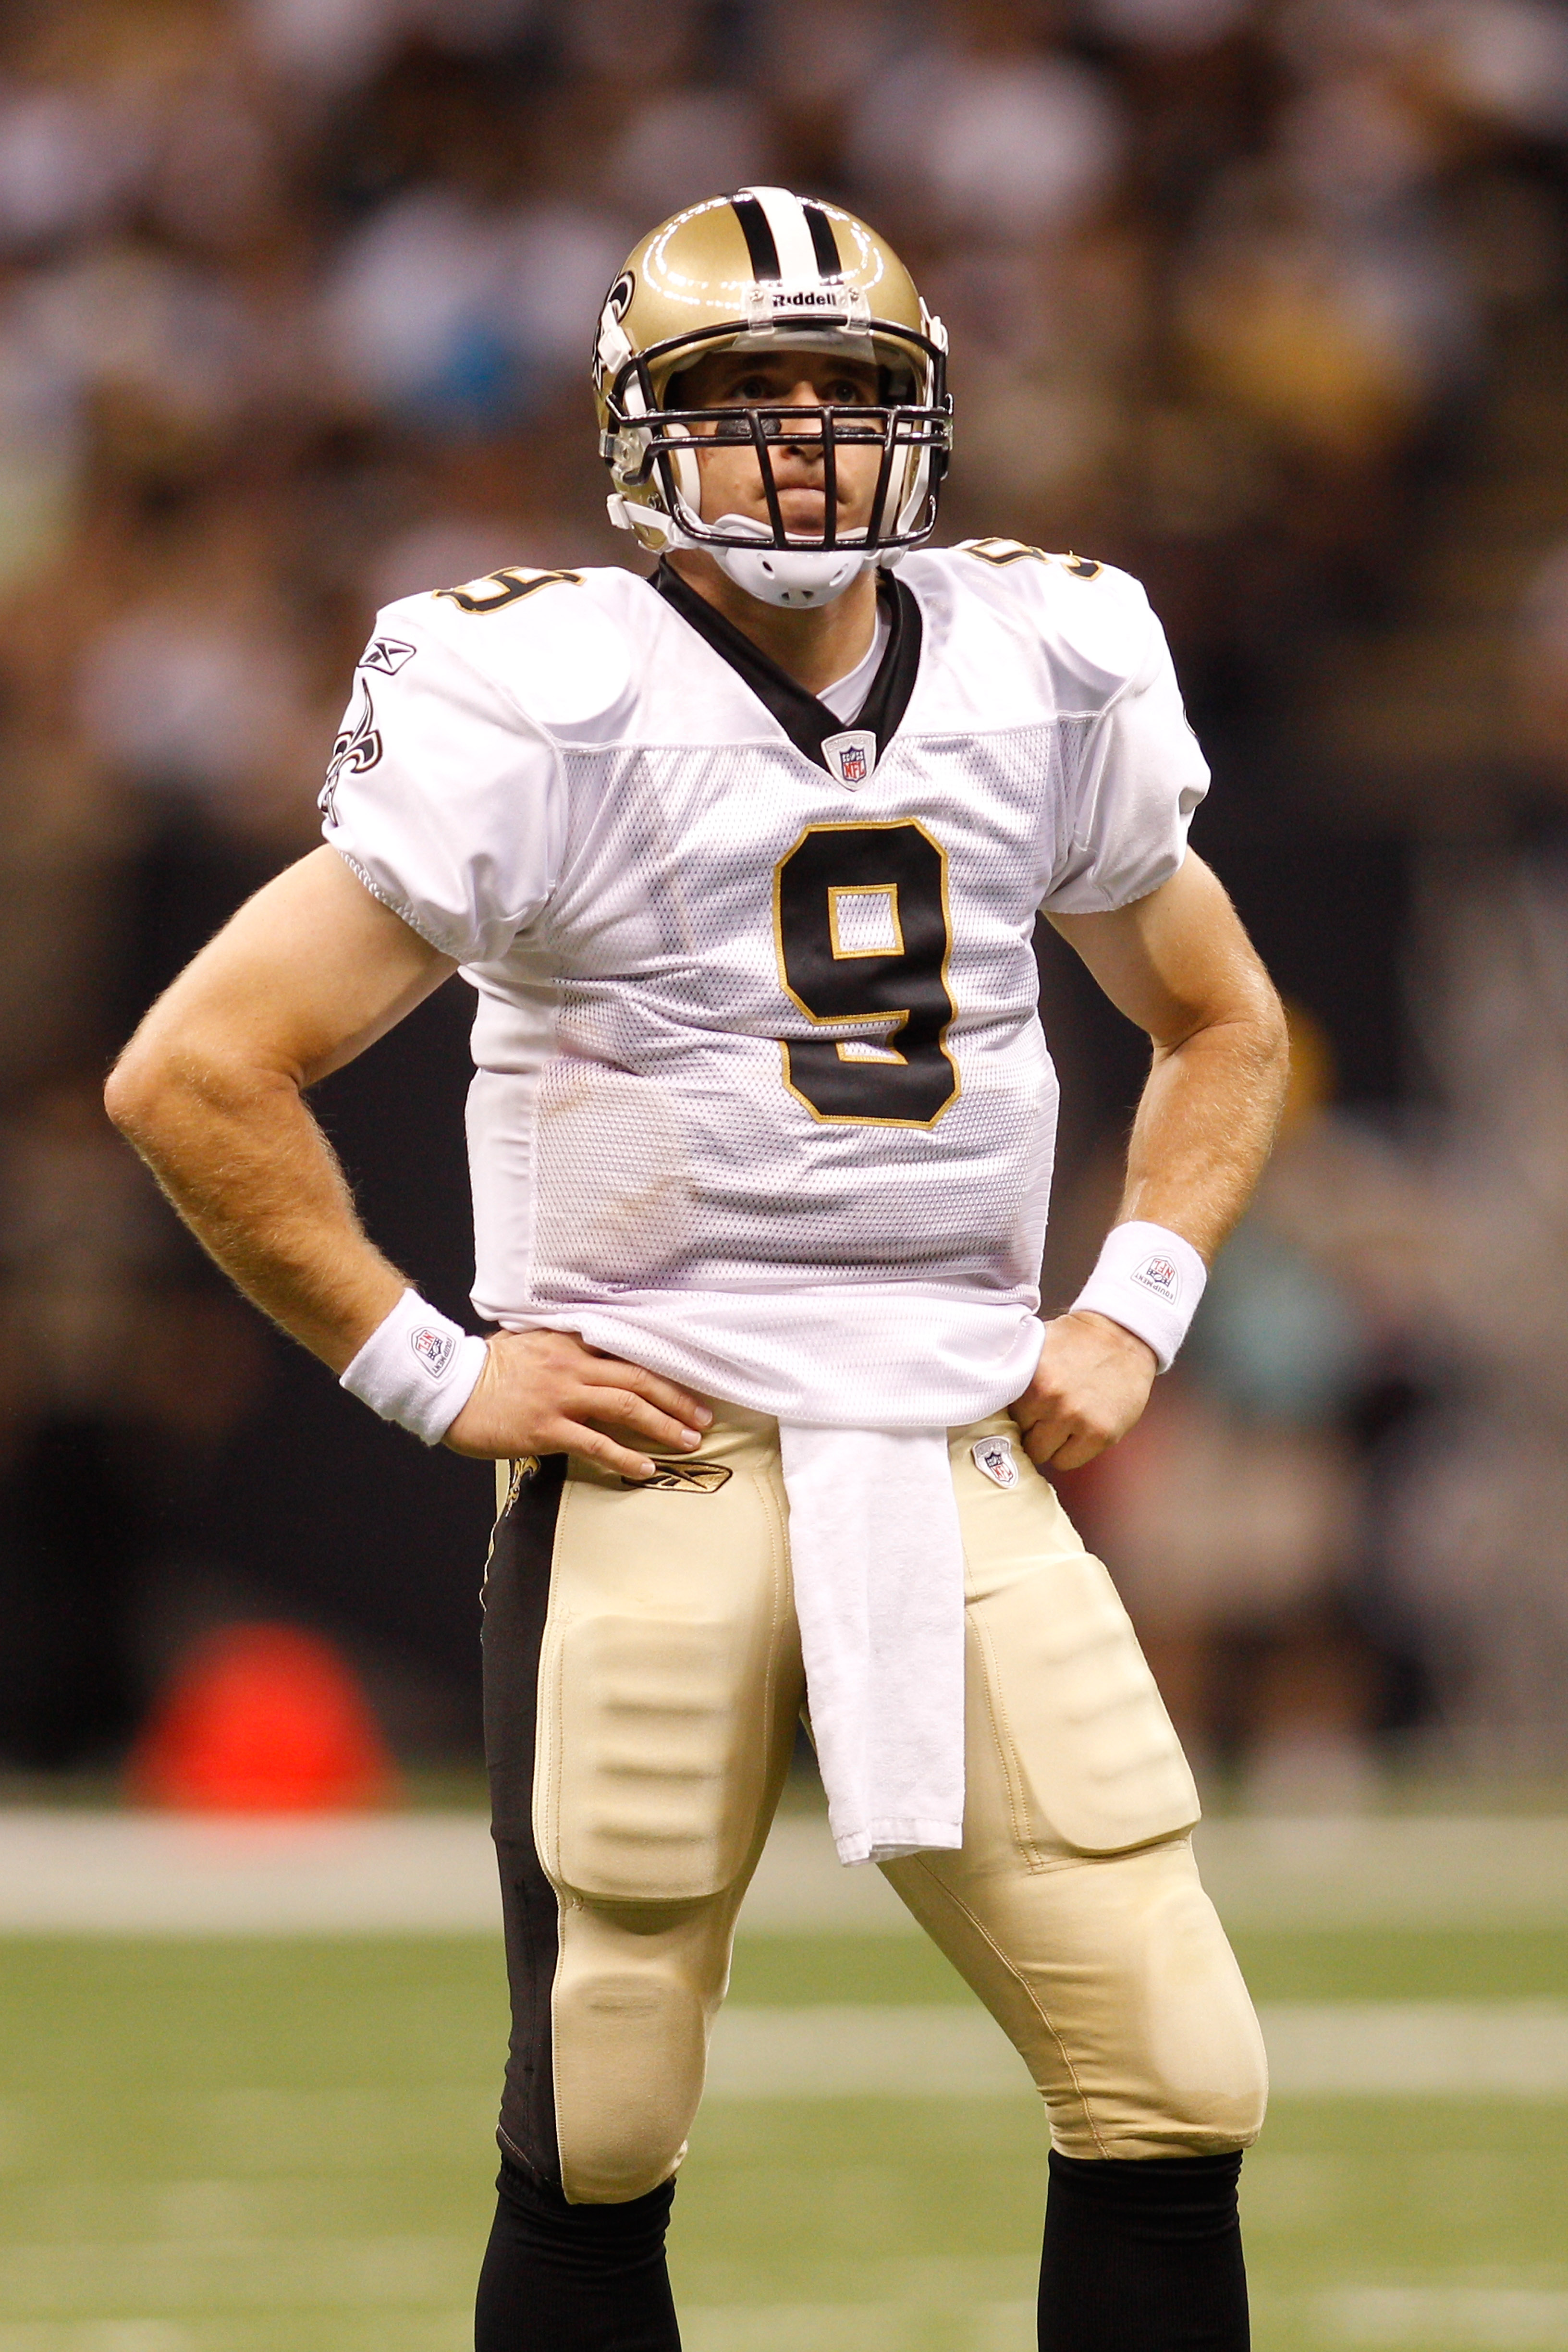 NEW ORLEANS - AUGUST 21:  Drew Brees #9 of the New Orleans Saints in action against the Houston Texans at the Louisiana Superdome on August 21, 2010 in New Orleans, Louisiana.  (Photo by Chris Graythen/Getty Images)